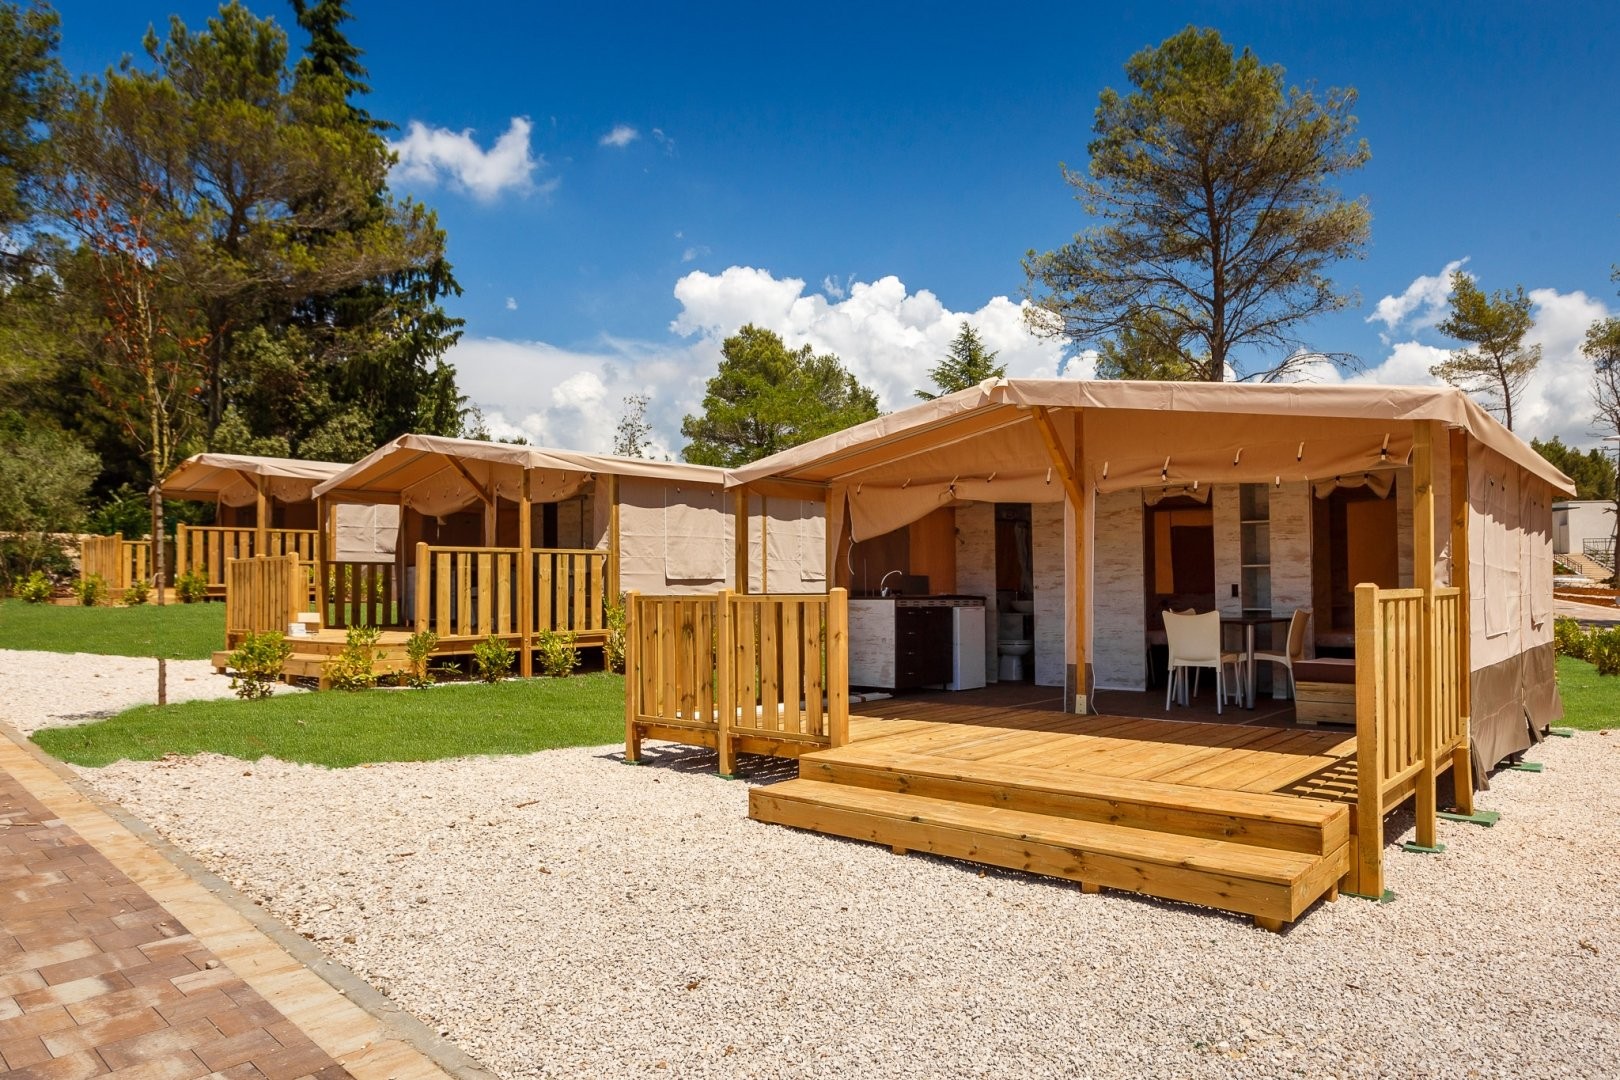 Discover our lodgetents